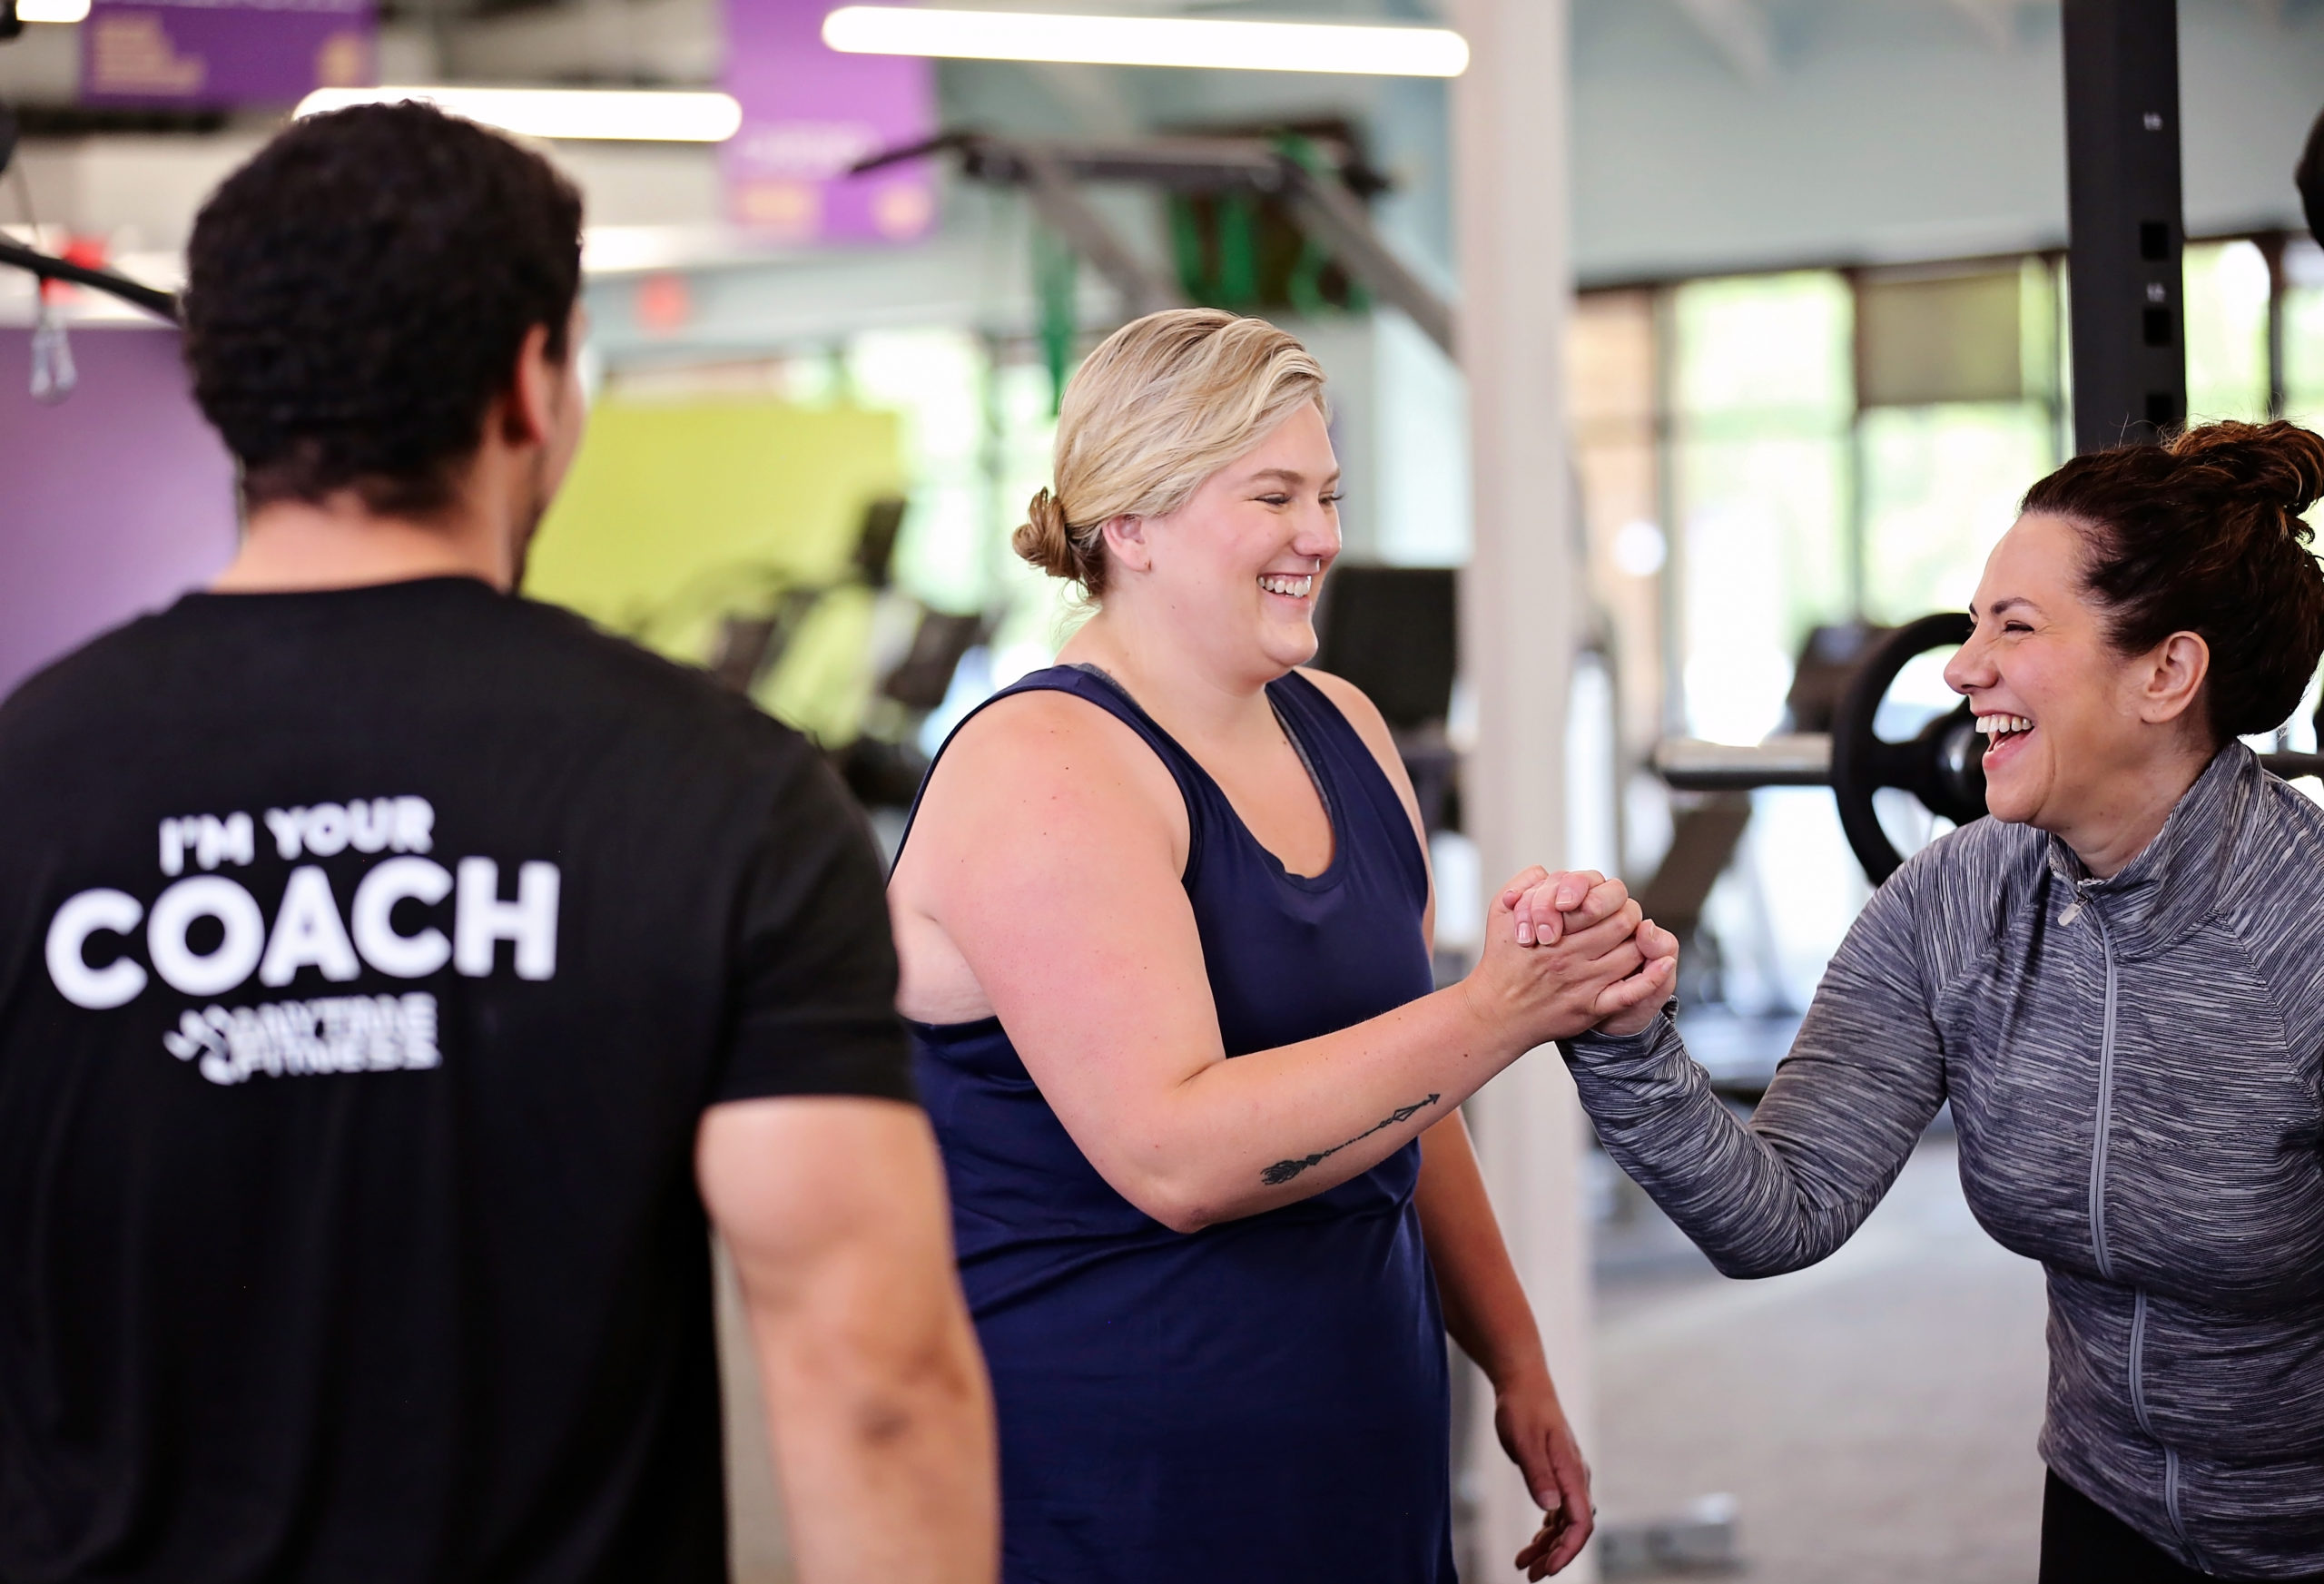 Is There a Right Way to Meet People at the Gym? - Anytime Fitness